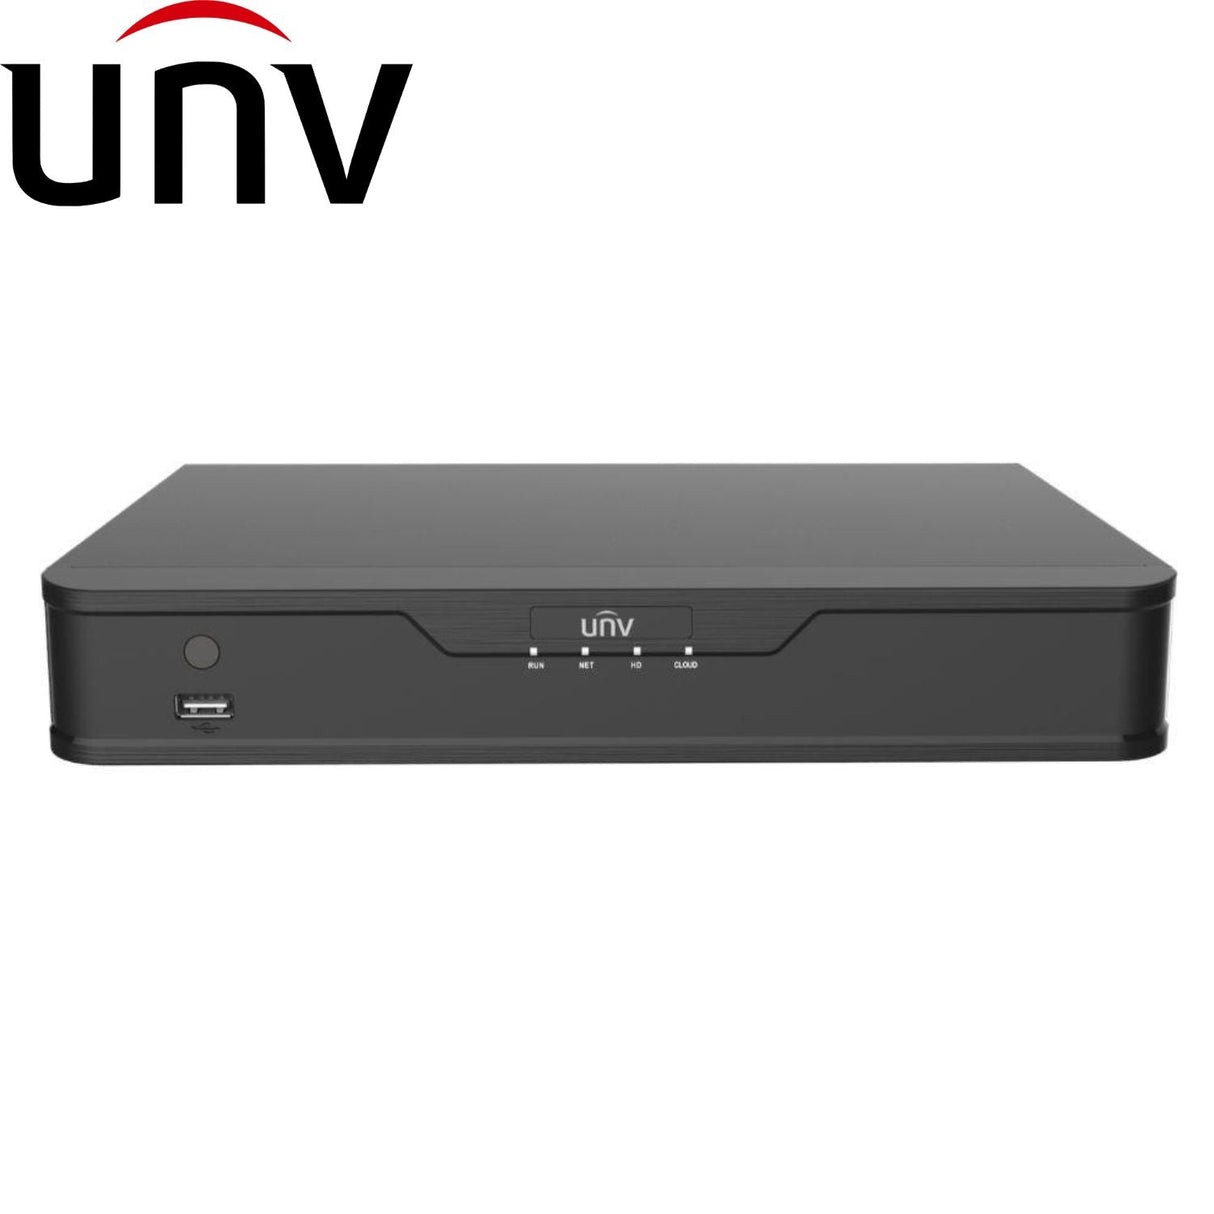 Uniview EasyStar Security System: 2x 6MP Turret Cams, 4CH 4K NVR + HDD (Black)